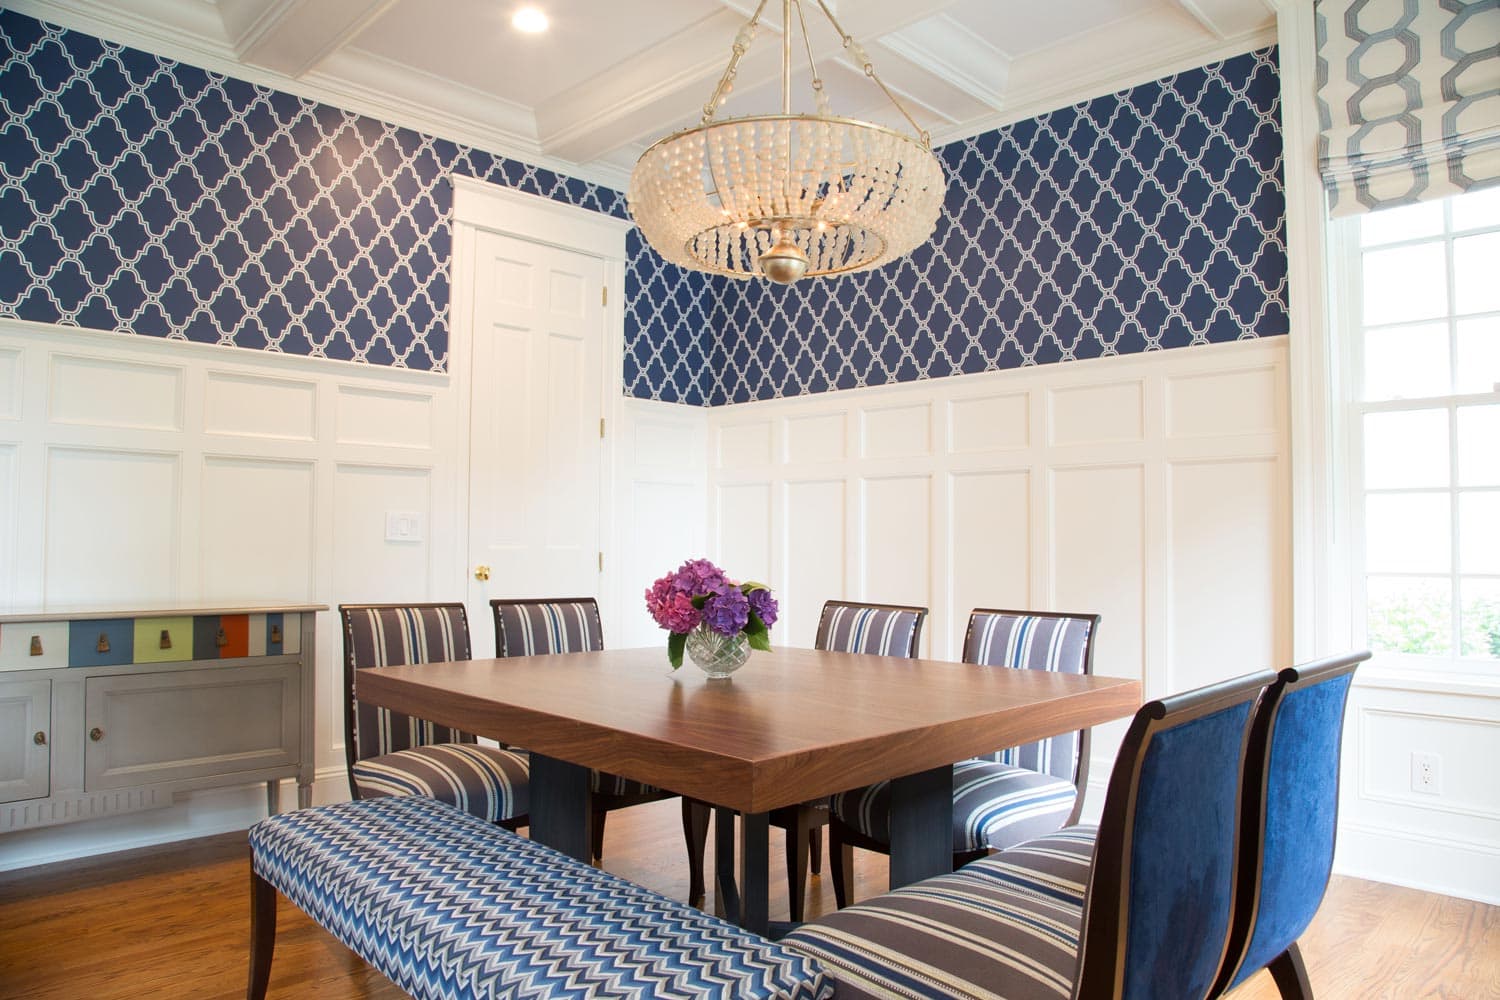 Dining room design by Annette Jaffe Interiors in a grand colonial home